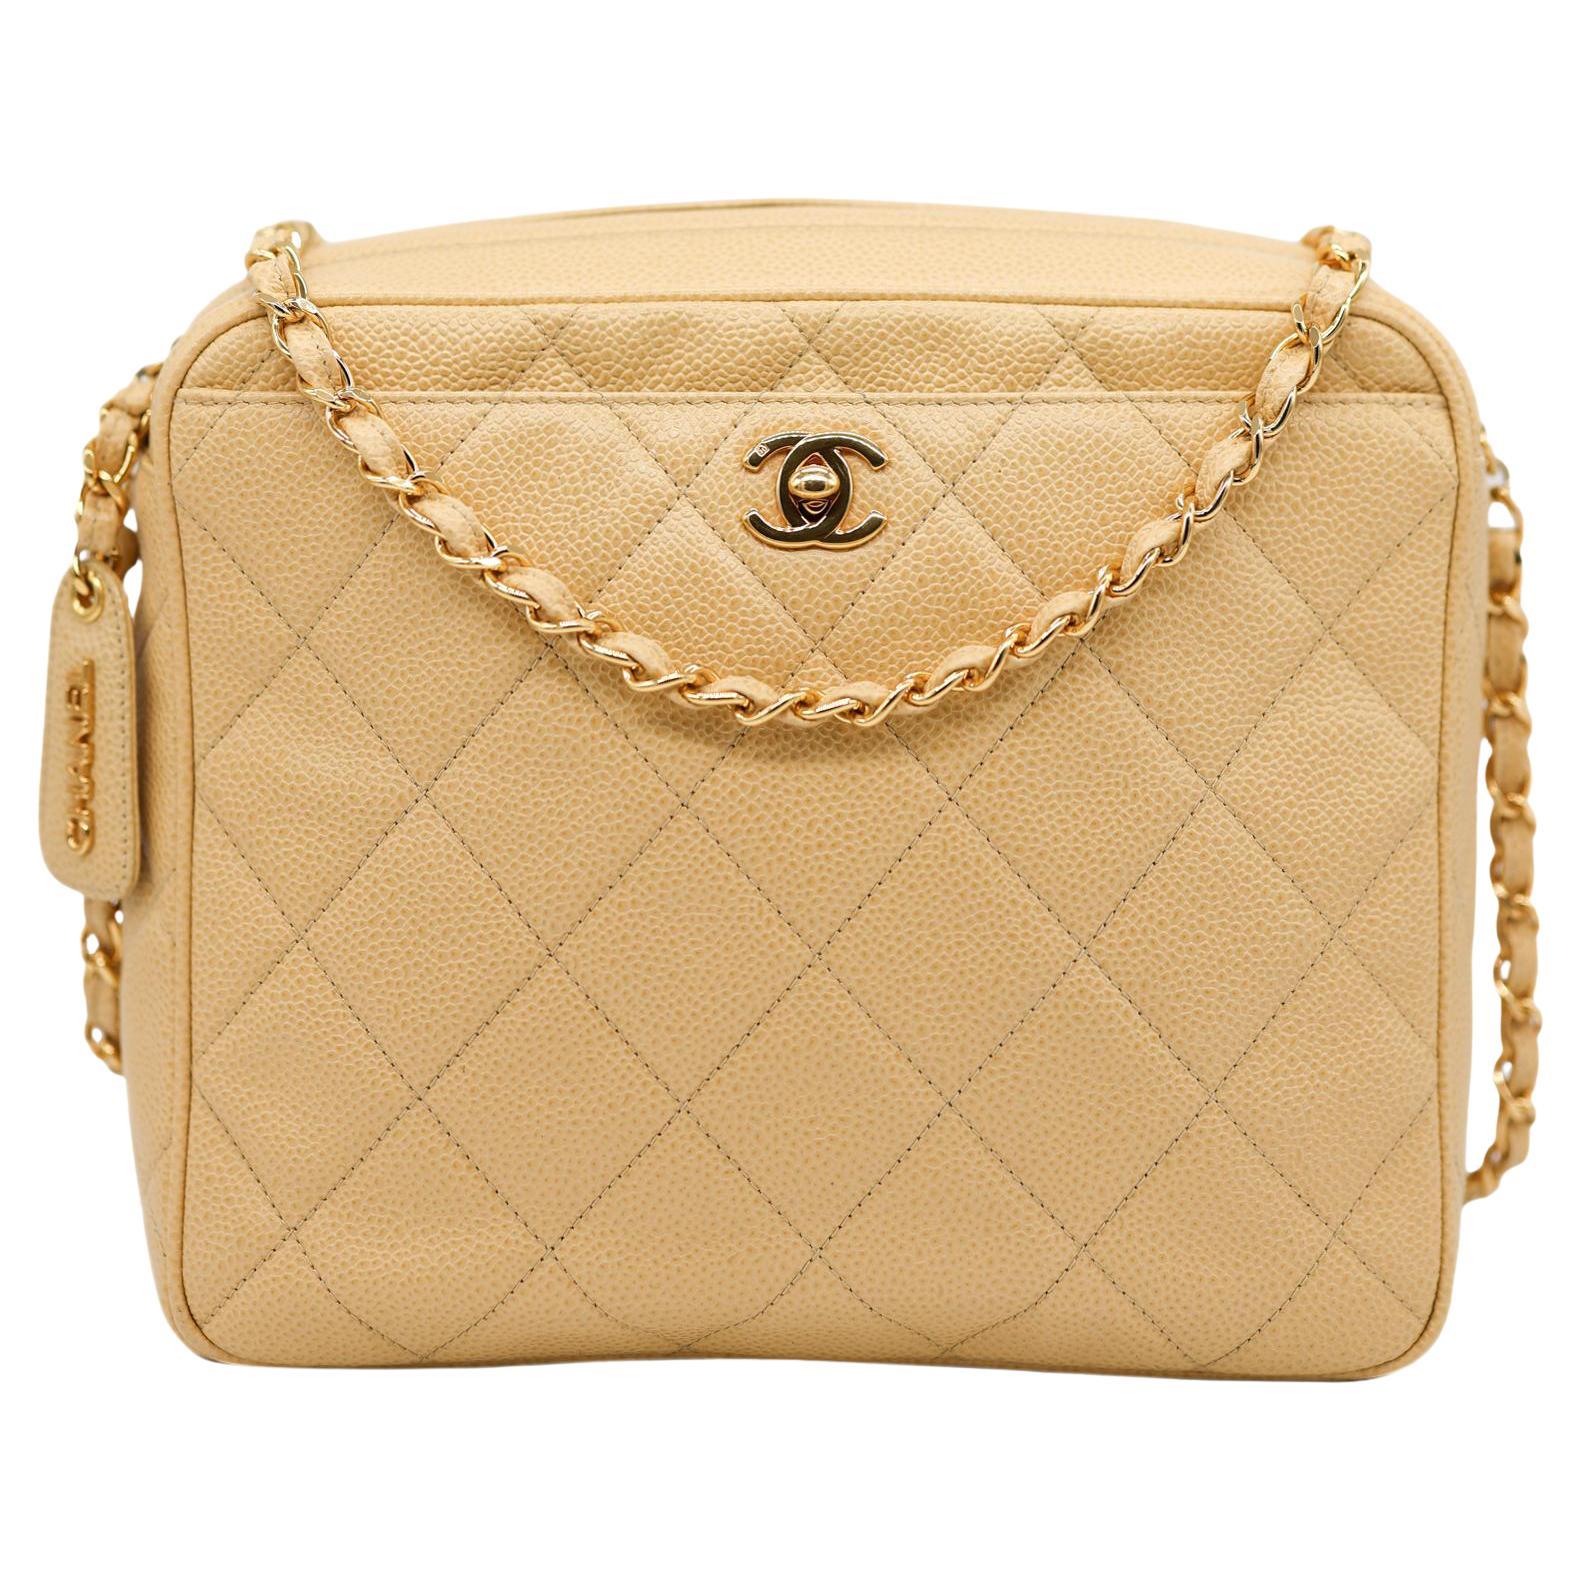 Chanel Vintage Quilted Caviar Leather Camera Bag with Gold Hardware, 1996 - 1997.